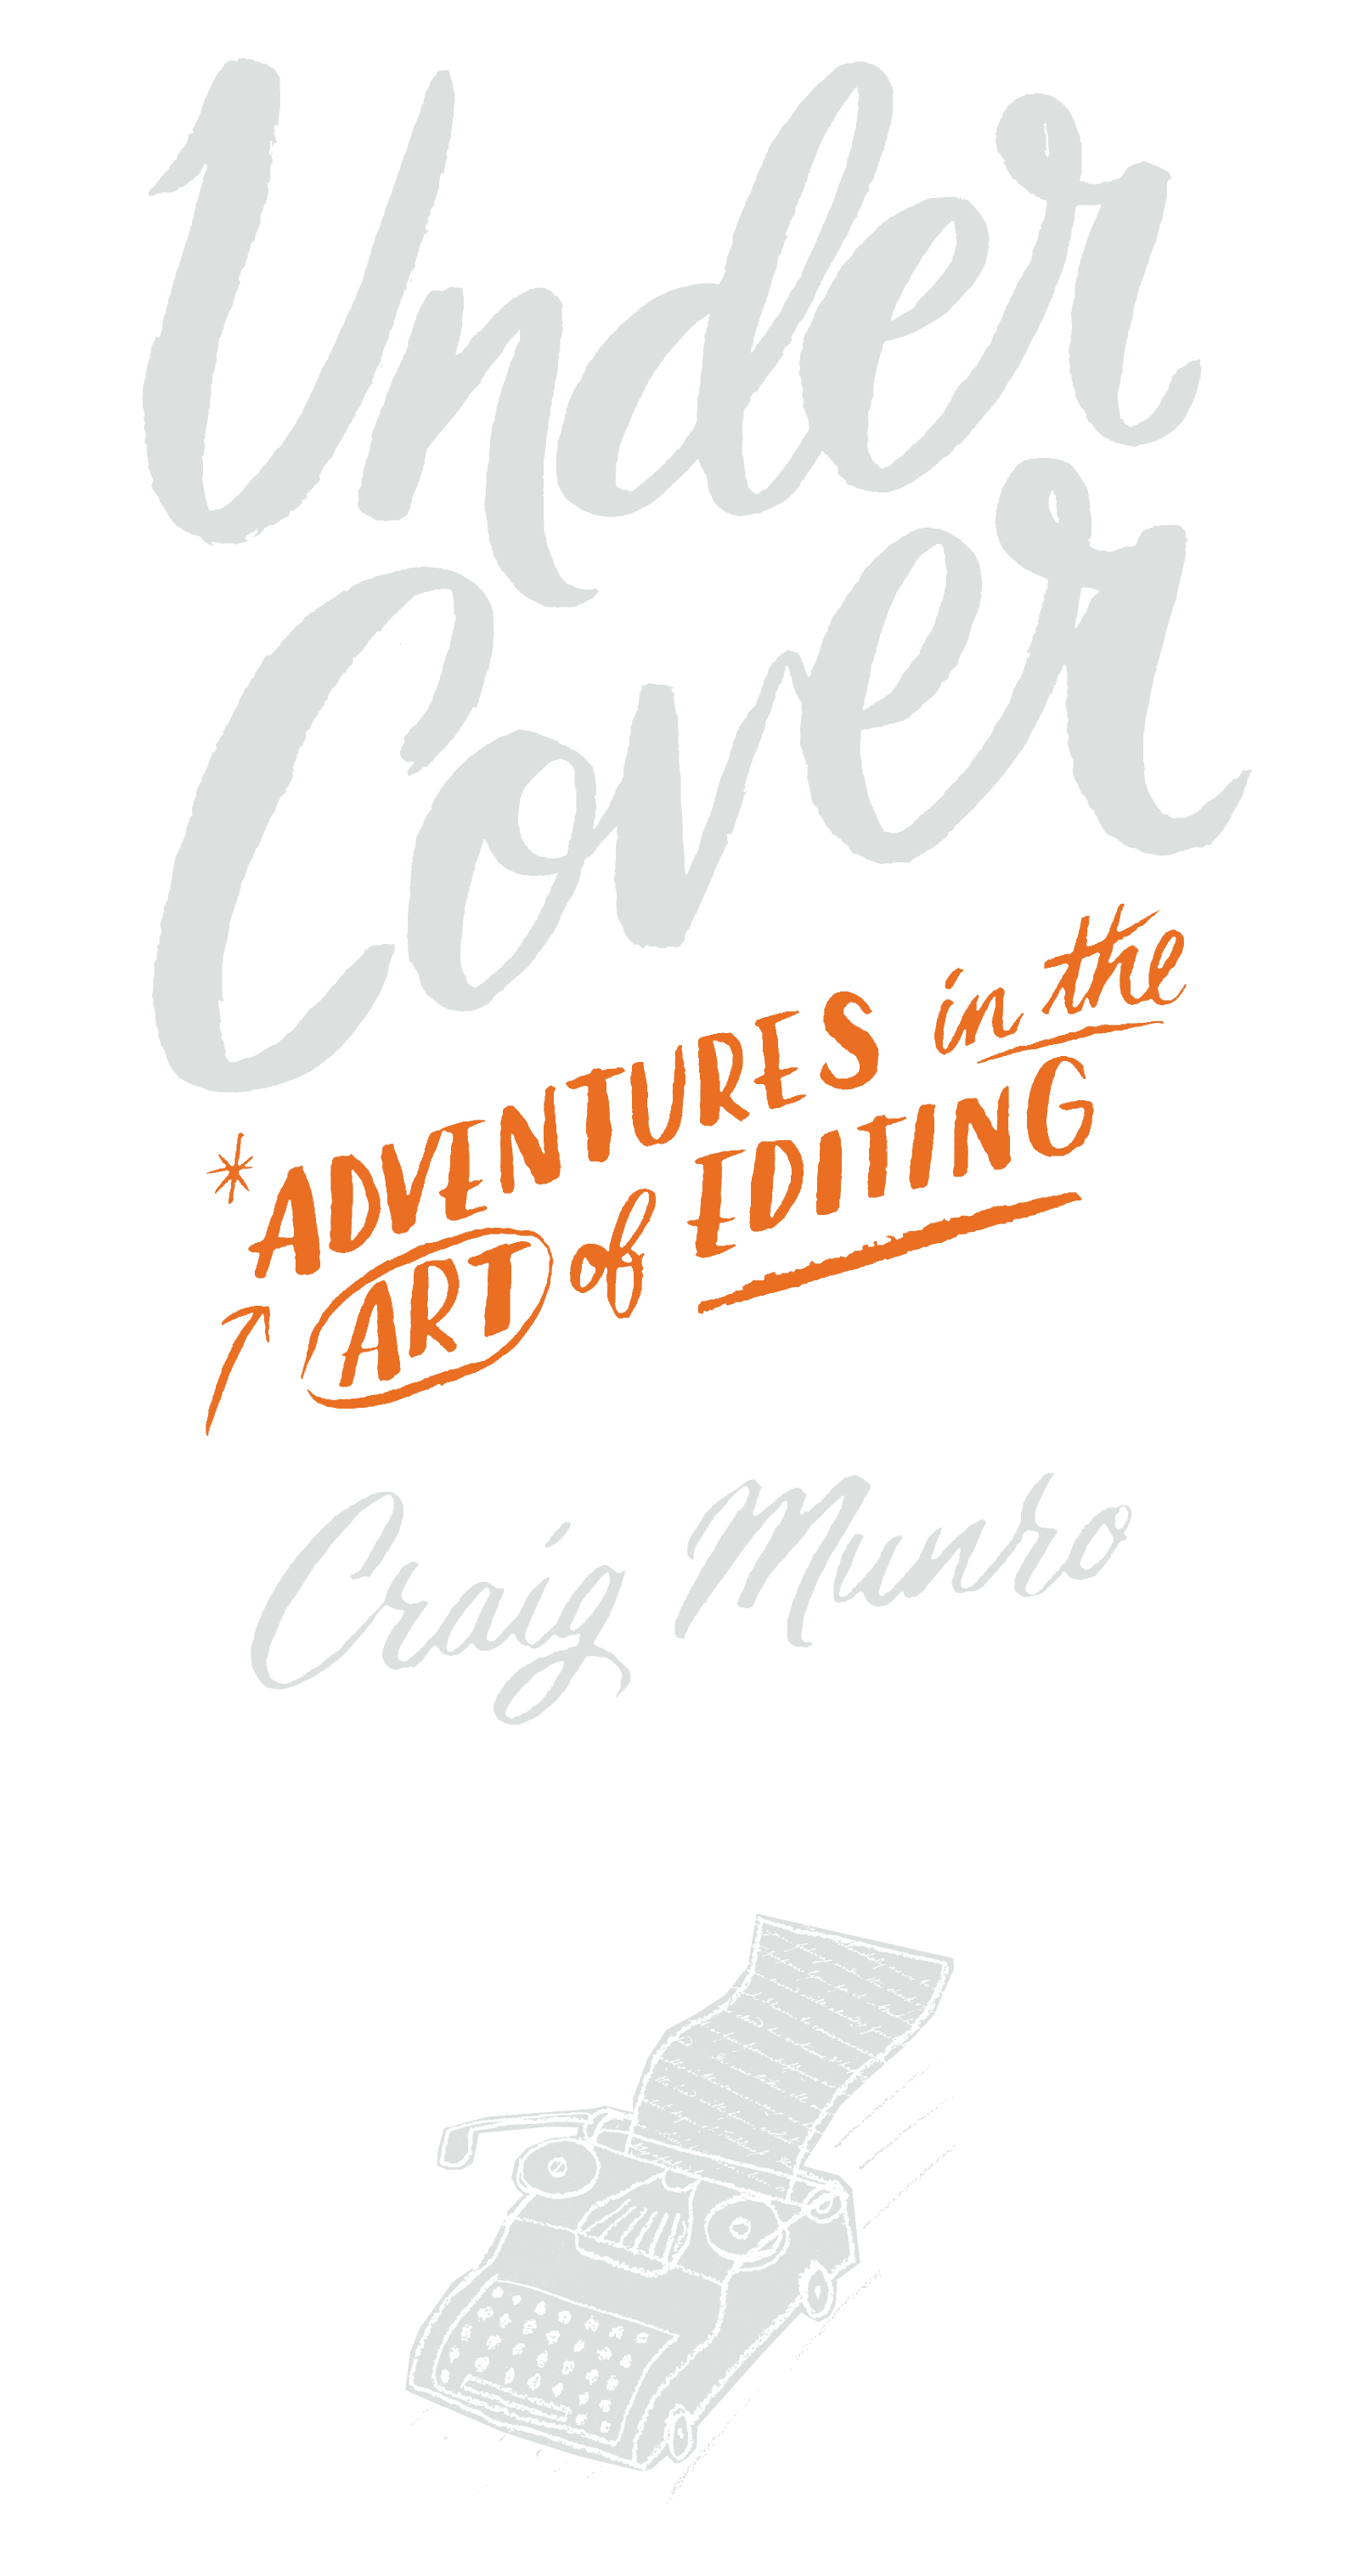 Book Cover. Under Cover, Adventures in the Art of Editing. By Craig Munro.